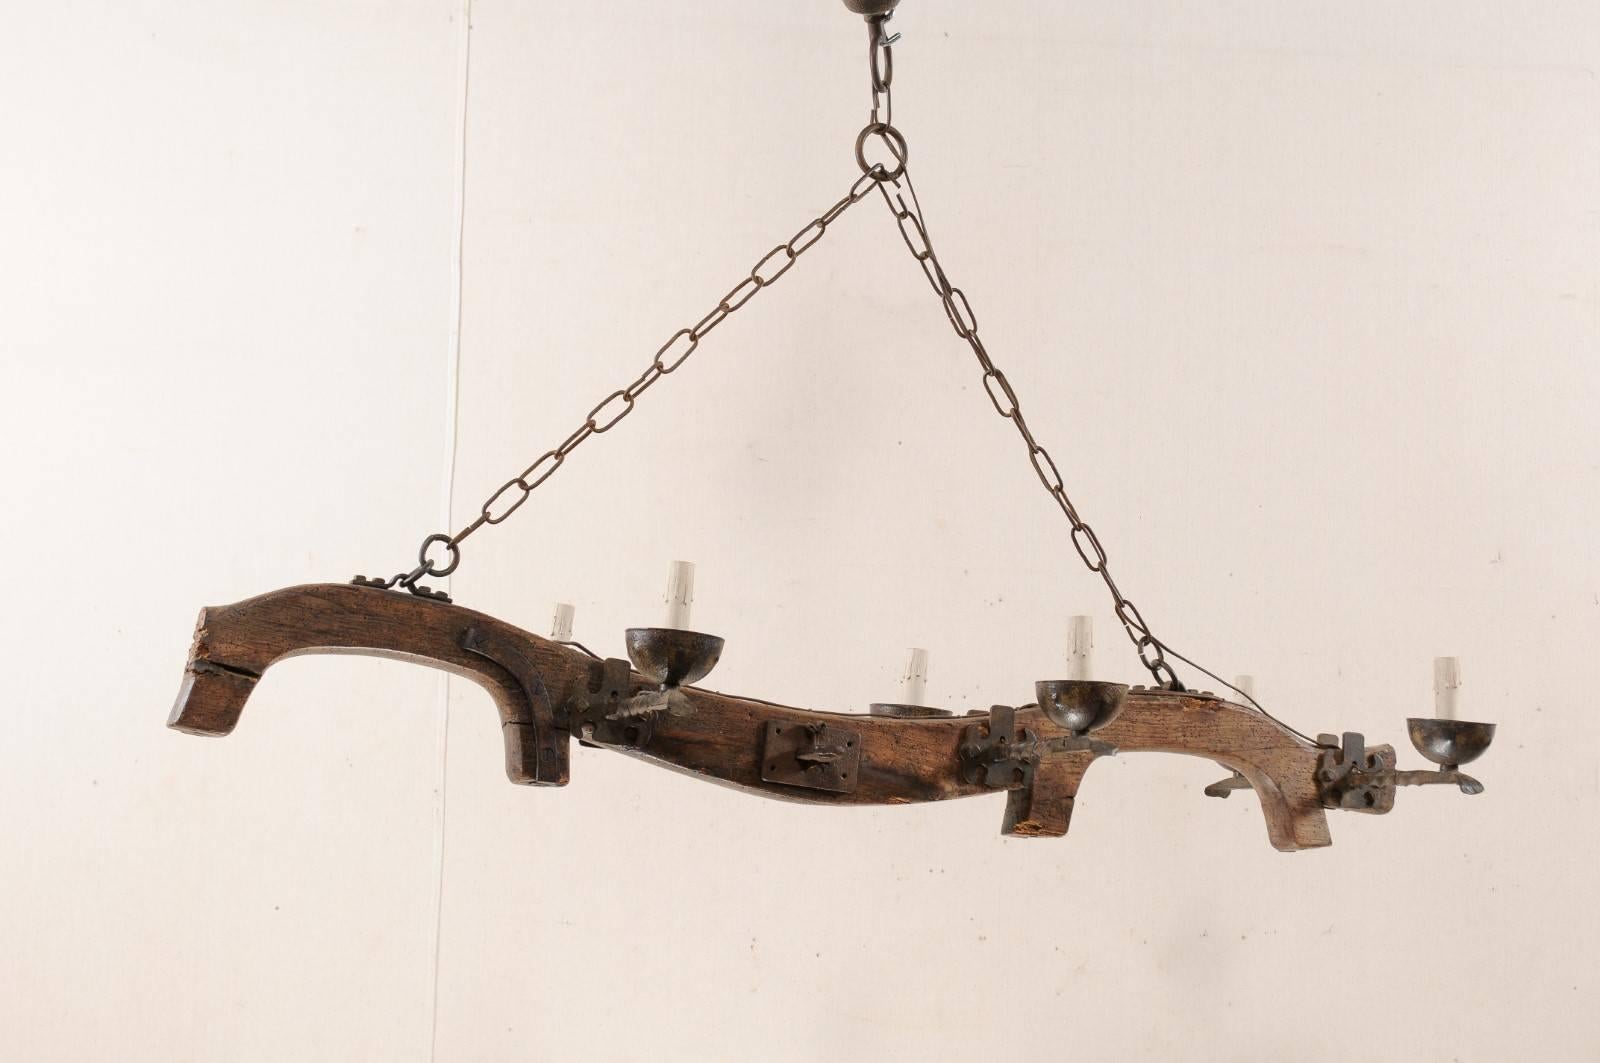 This midcentury Spanish ox yoke has been re-purposed and given a new life in this custom six-light chandelier. The wooden body of this chandelier is the yoke, which is a wooden beam typically used between a pair of oxen (or other animals) to